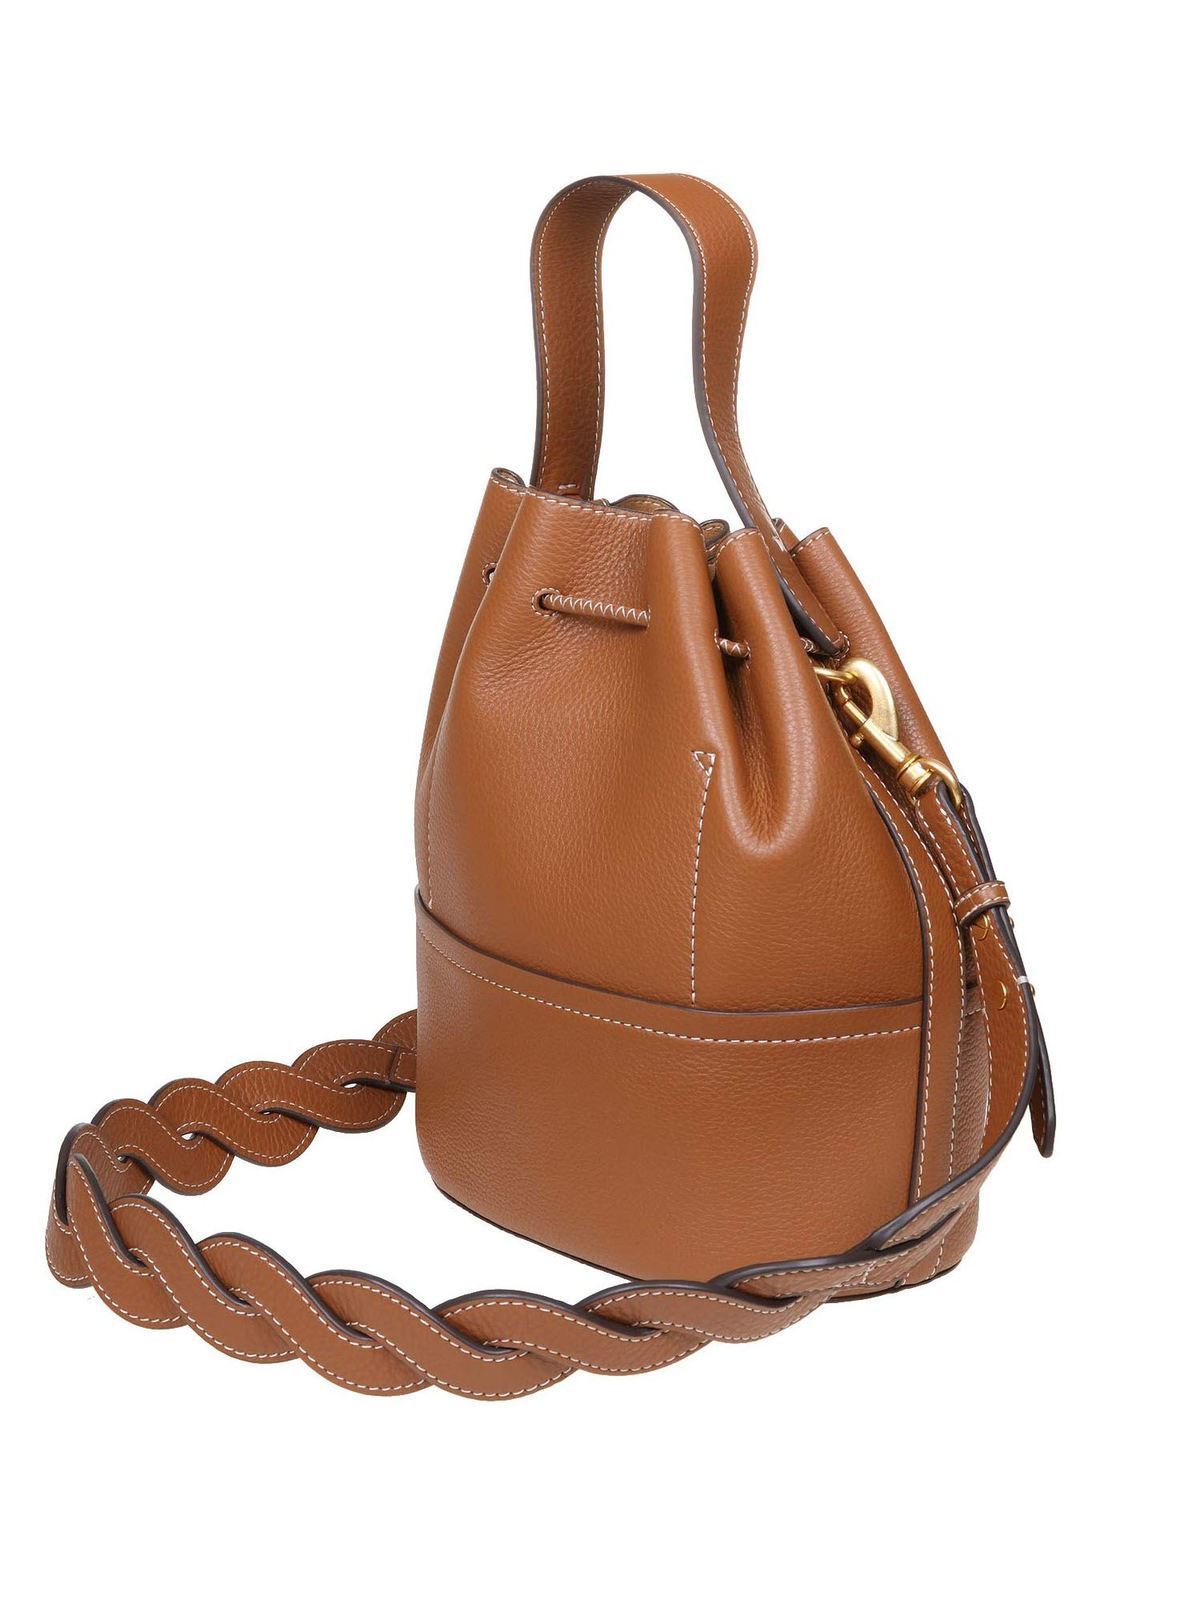 TORY BURCH: Miller bag in grained leather with emblem - Brown